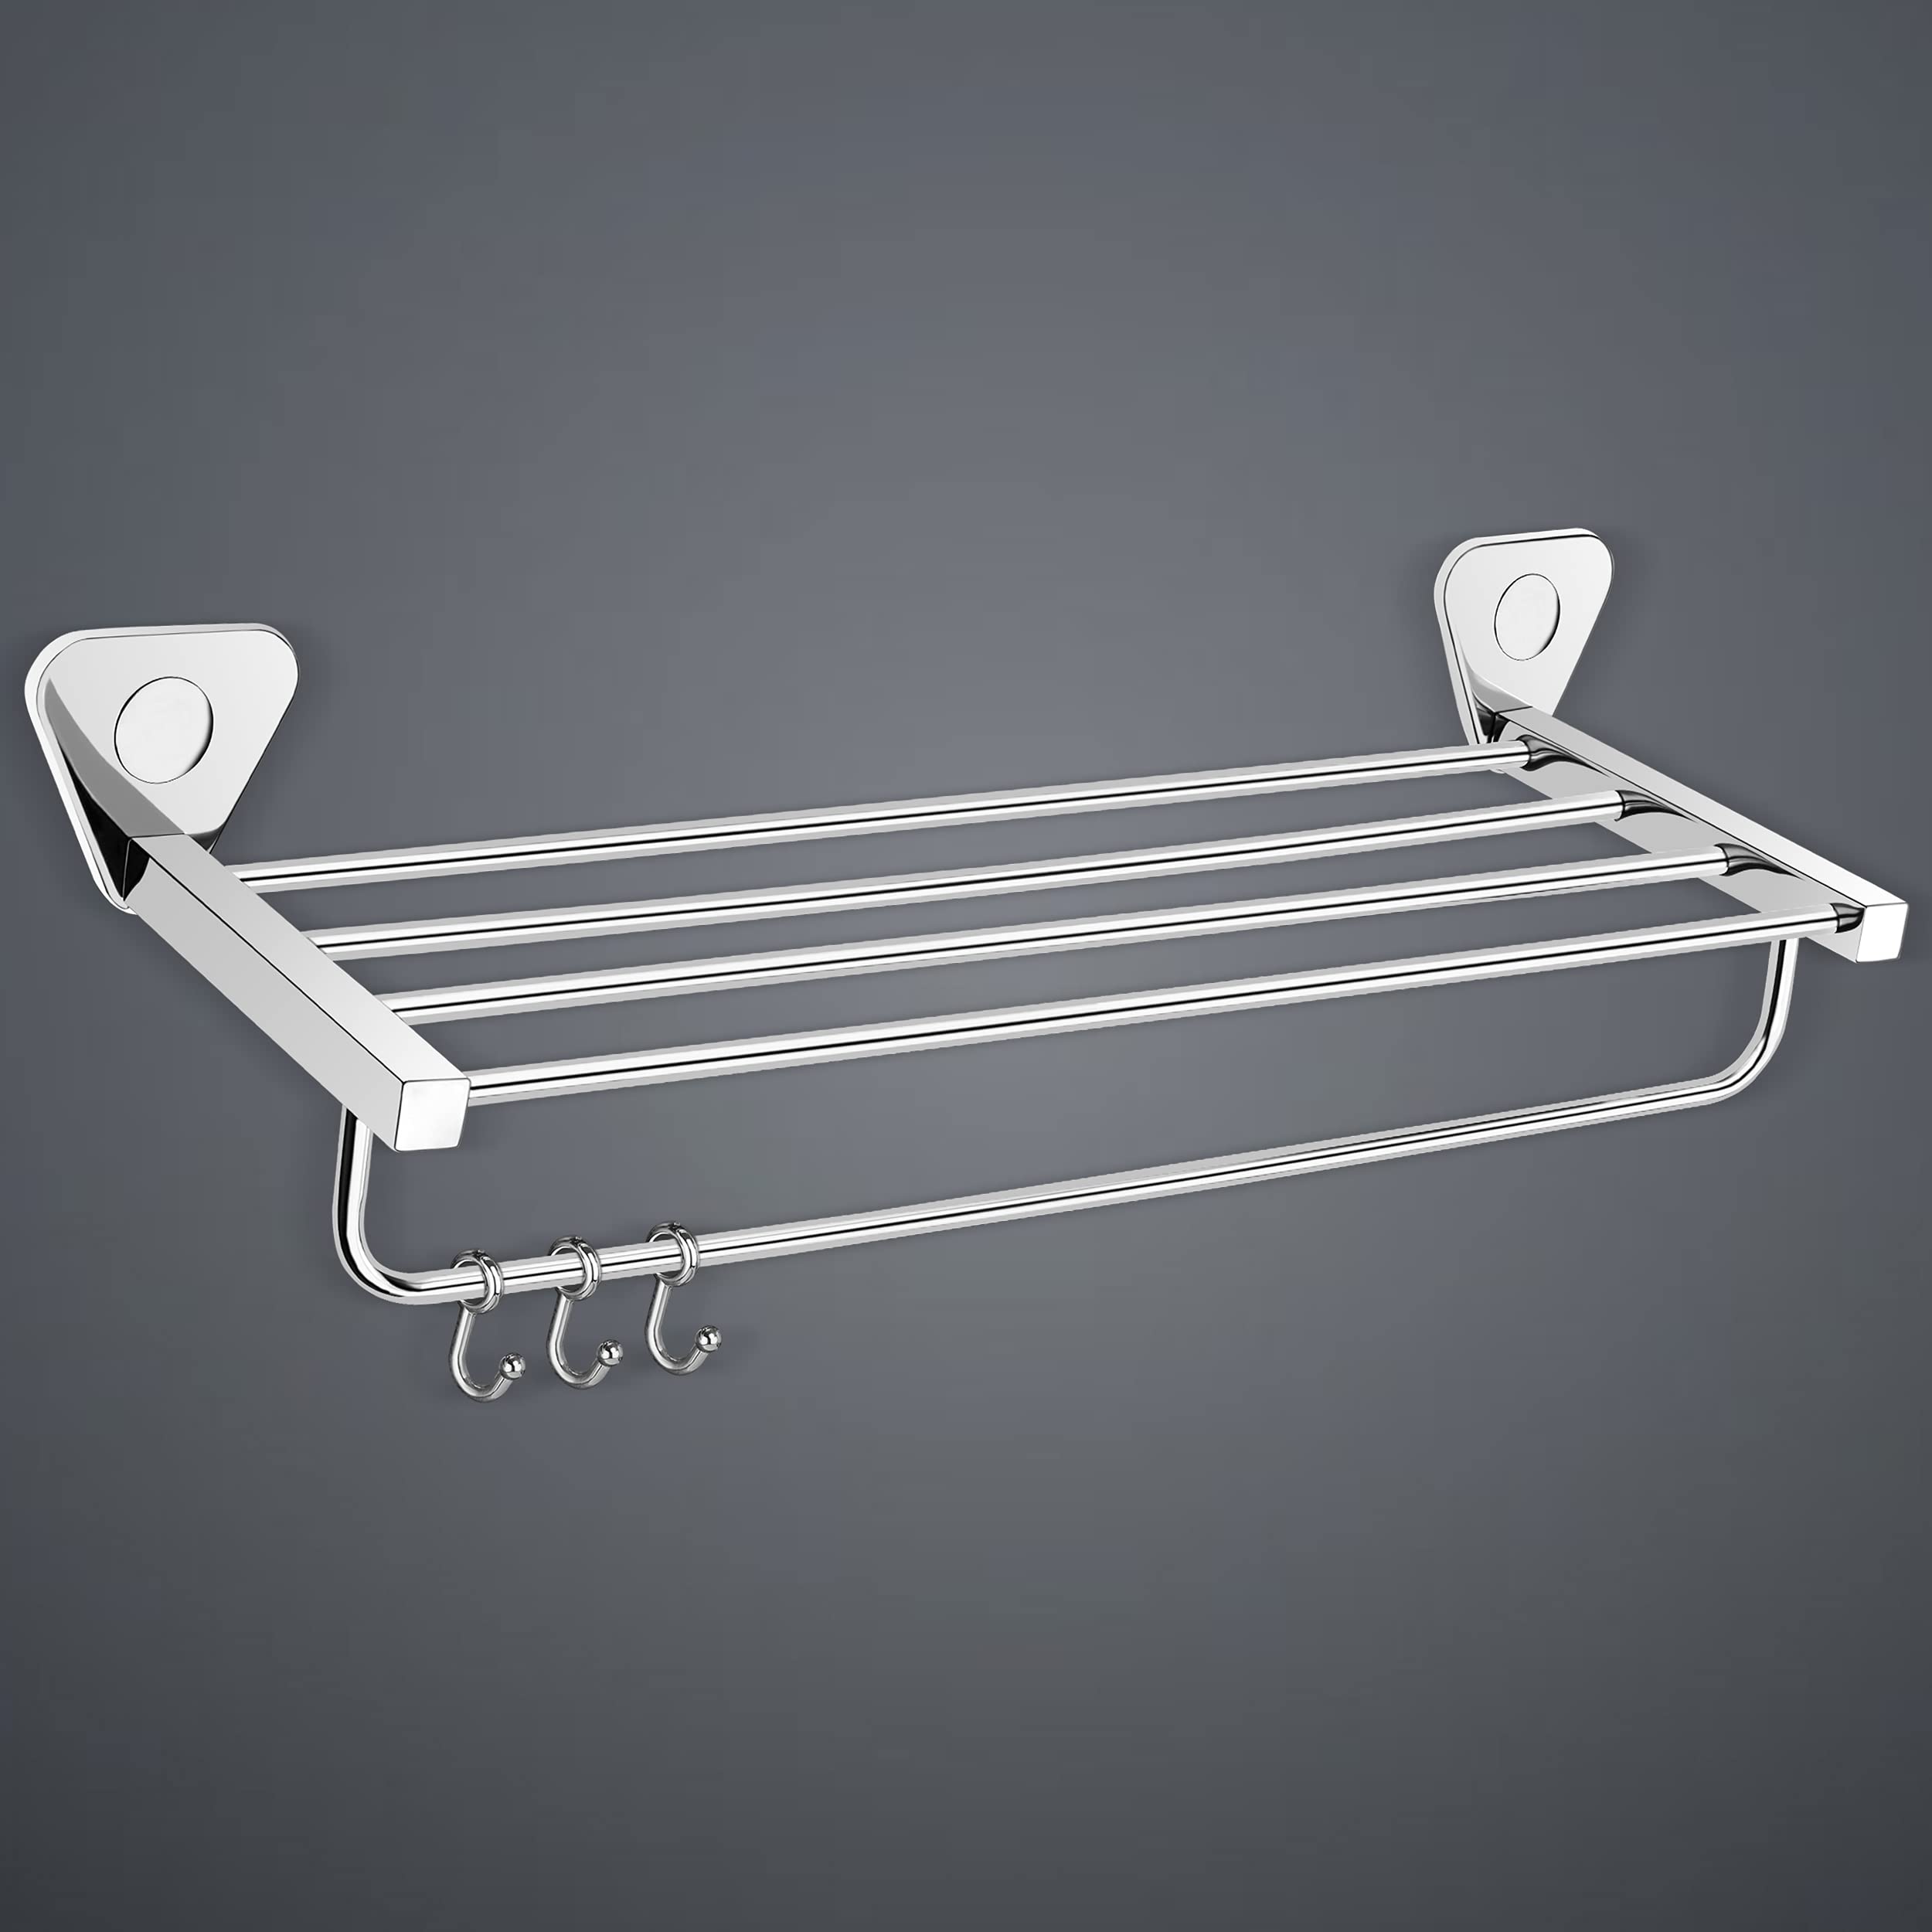 Plantex Pyramid Stainless Steel Towel Rack/Towel Hanger/Stand/Bathroom Accessories - 24 inch (Chrome)